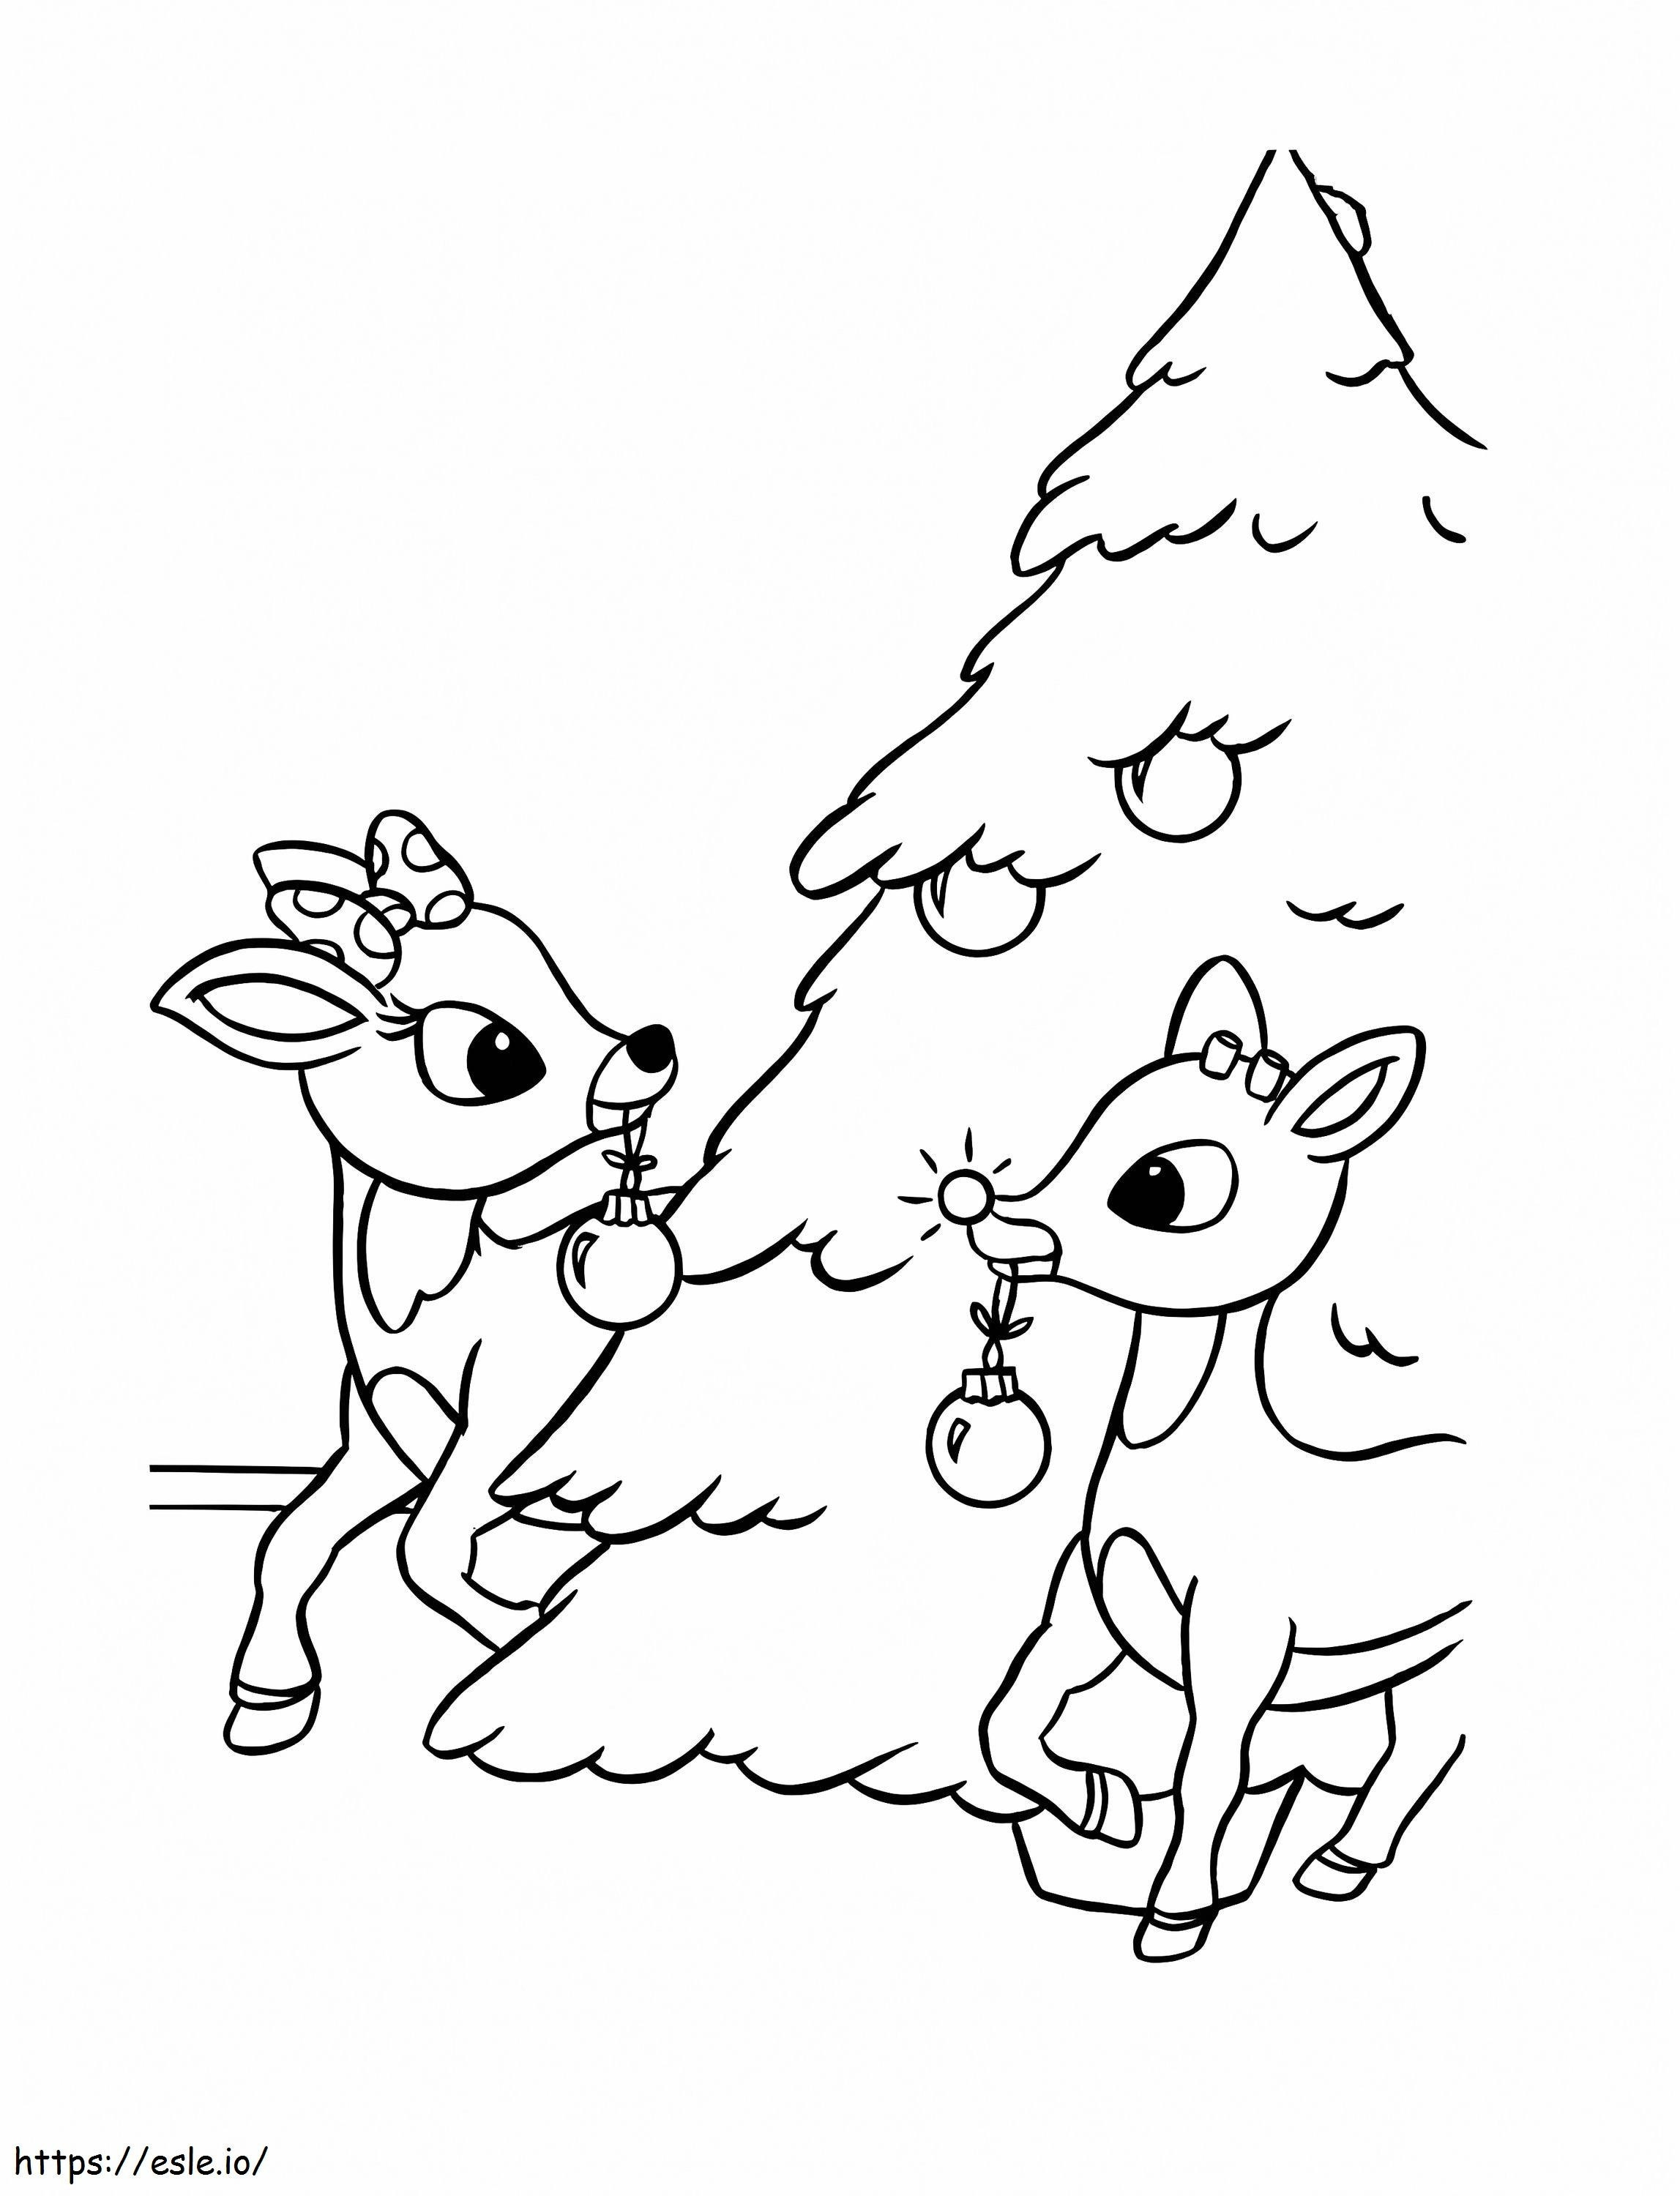 Rudolph And Christmas Tree coloring page